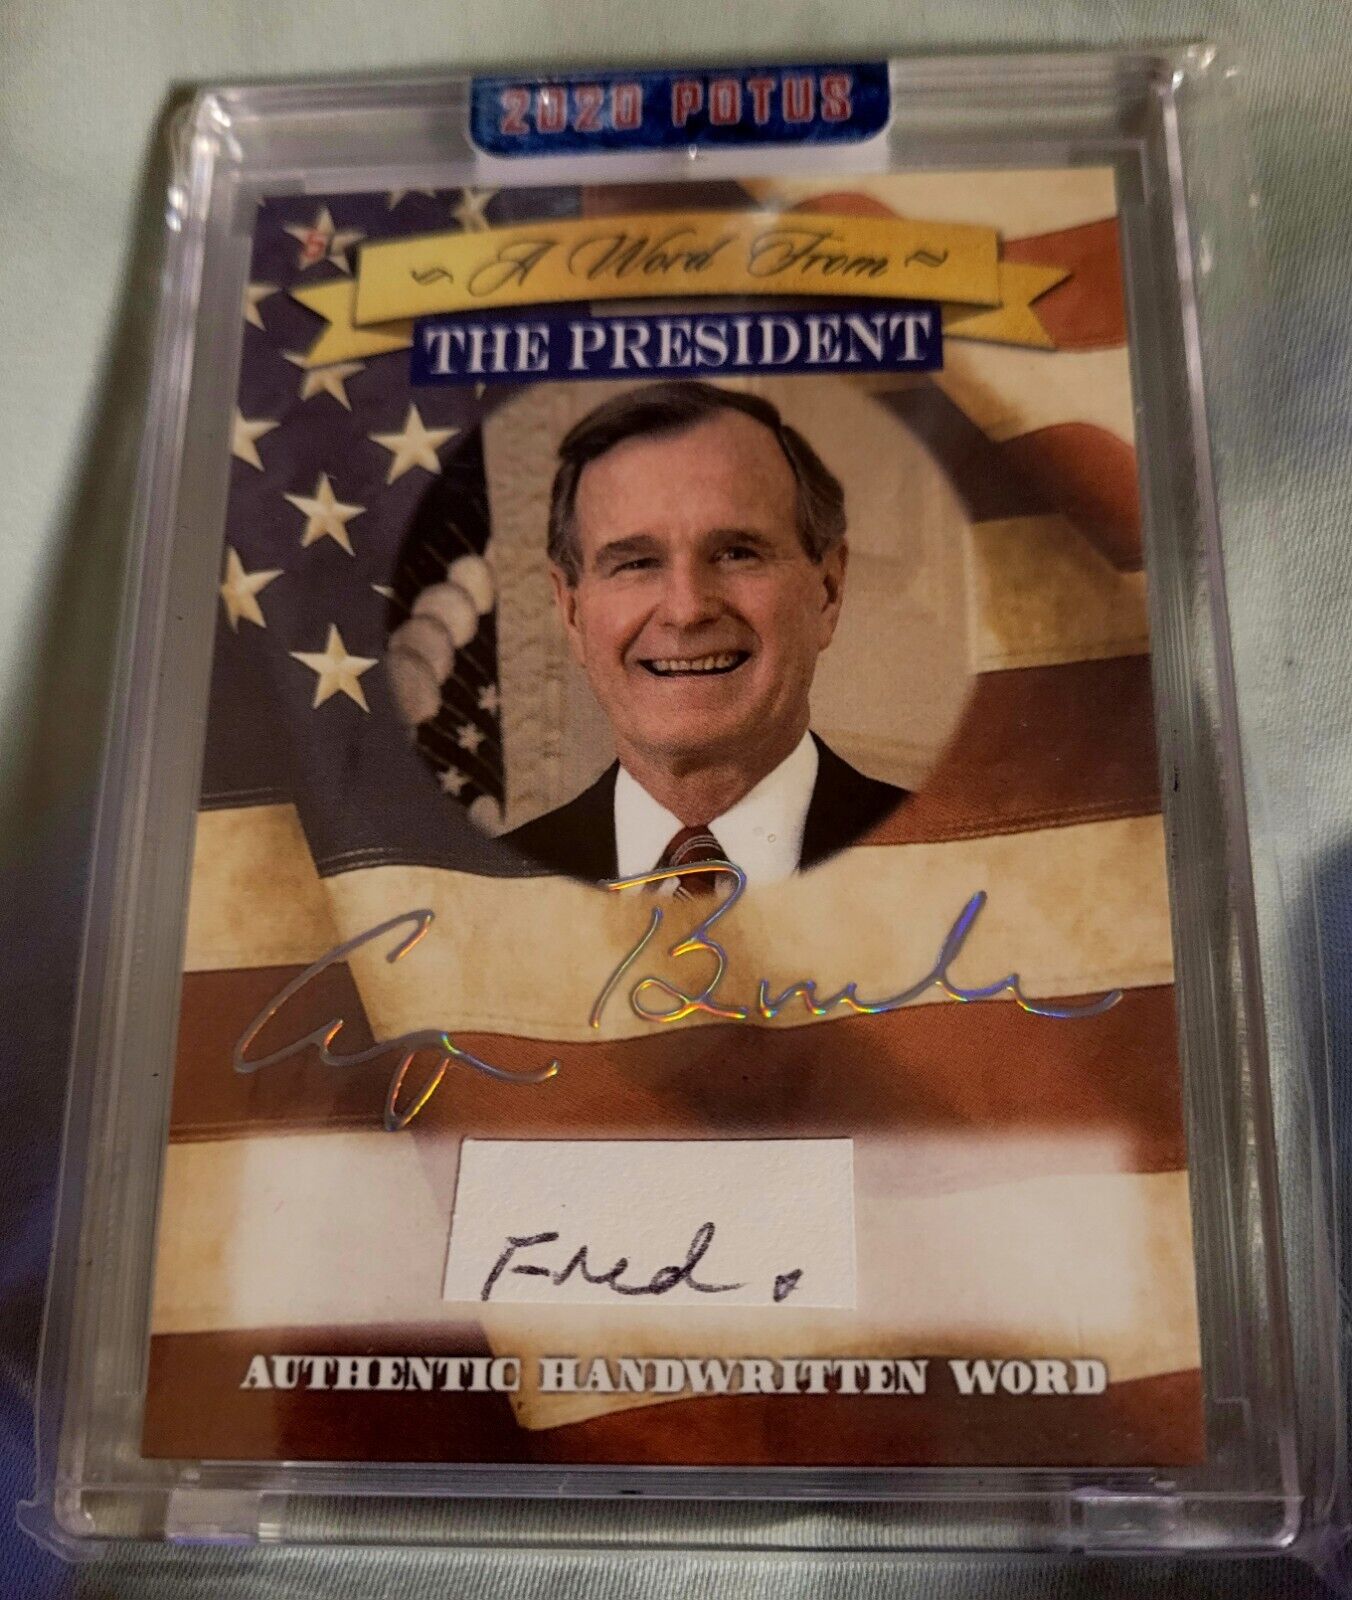 2020 POTUS WORD FROM THE PRESIDENT George H. W. Bush  AUTHENTIC HANDWRITTEN WORD